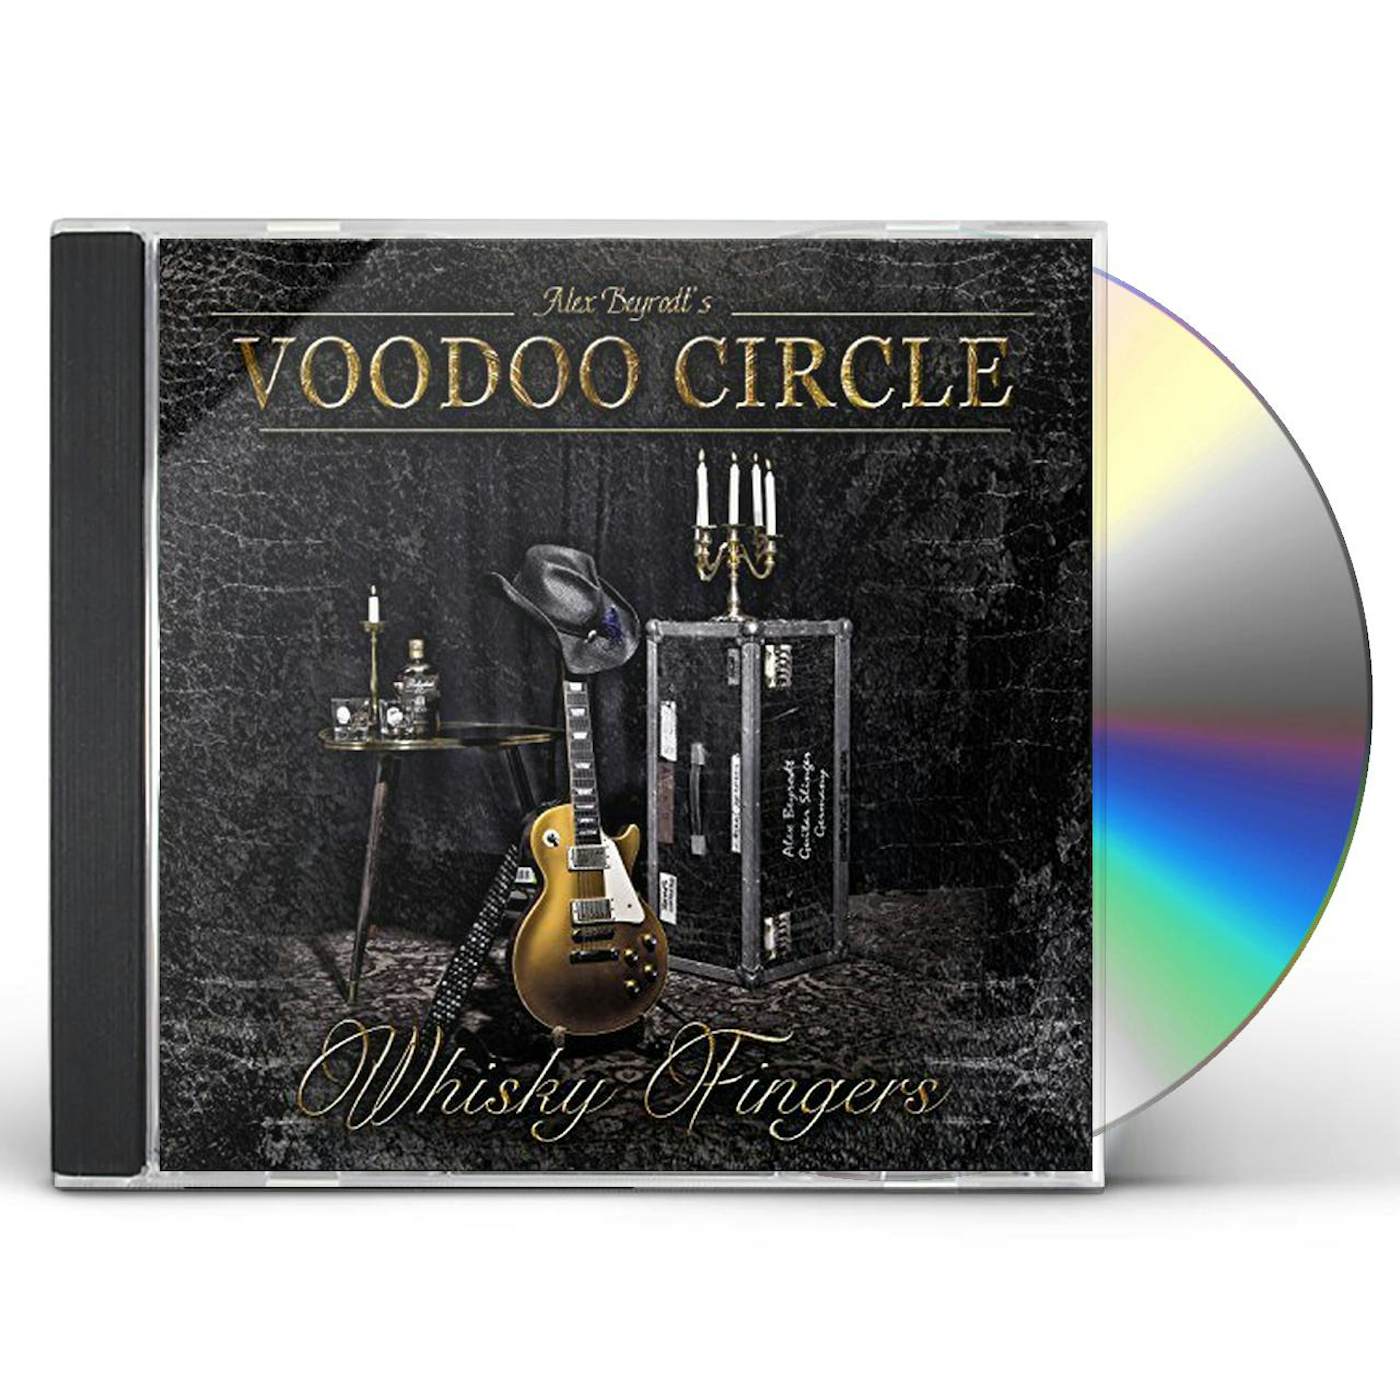 Voodoo Circle WHISKY FINGERS CD